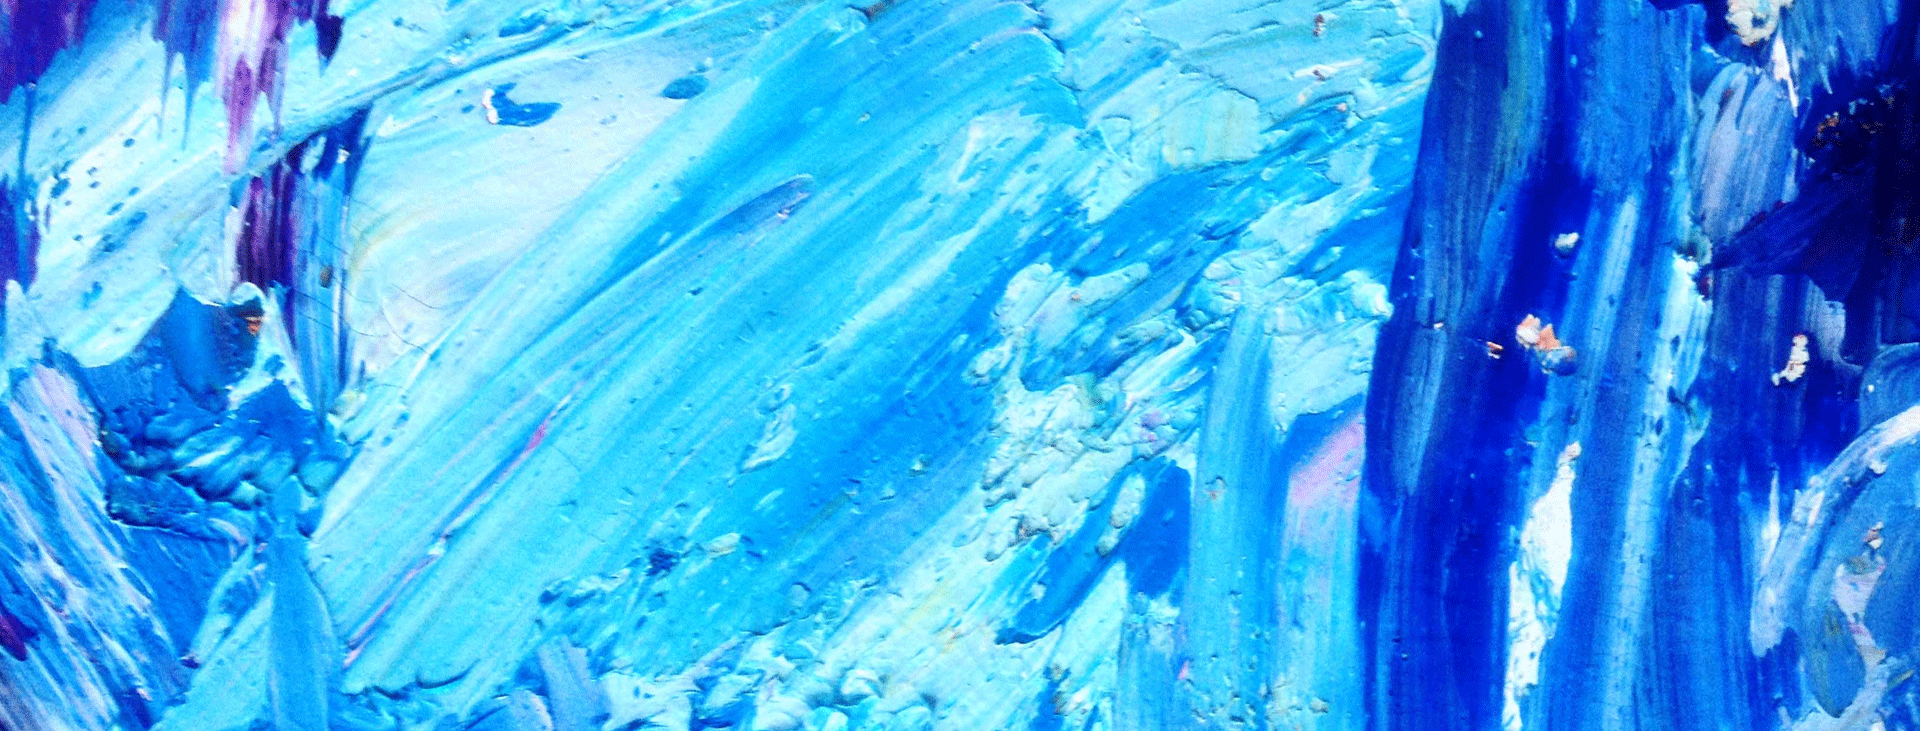 Abstract painting of blues and white